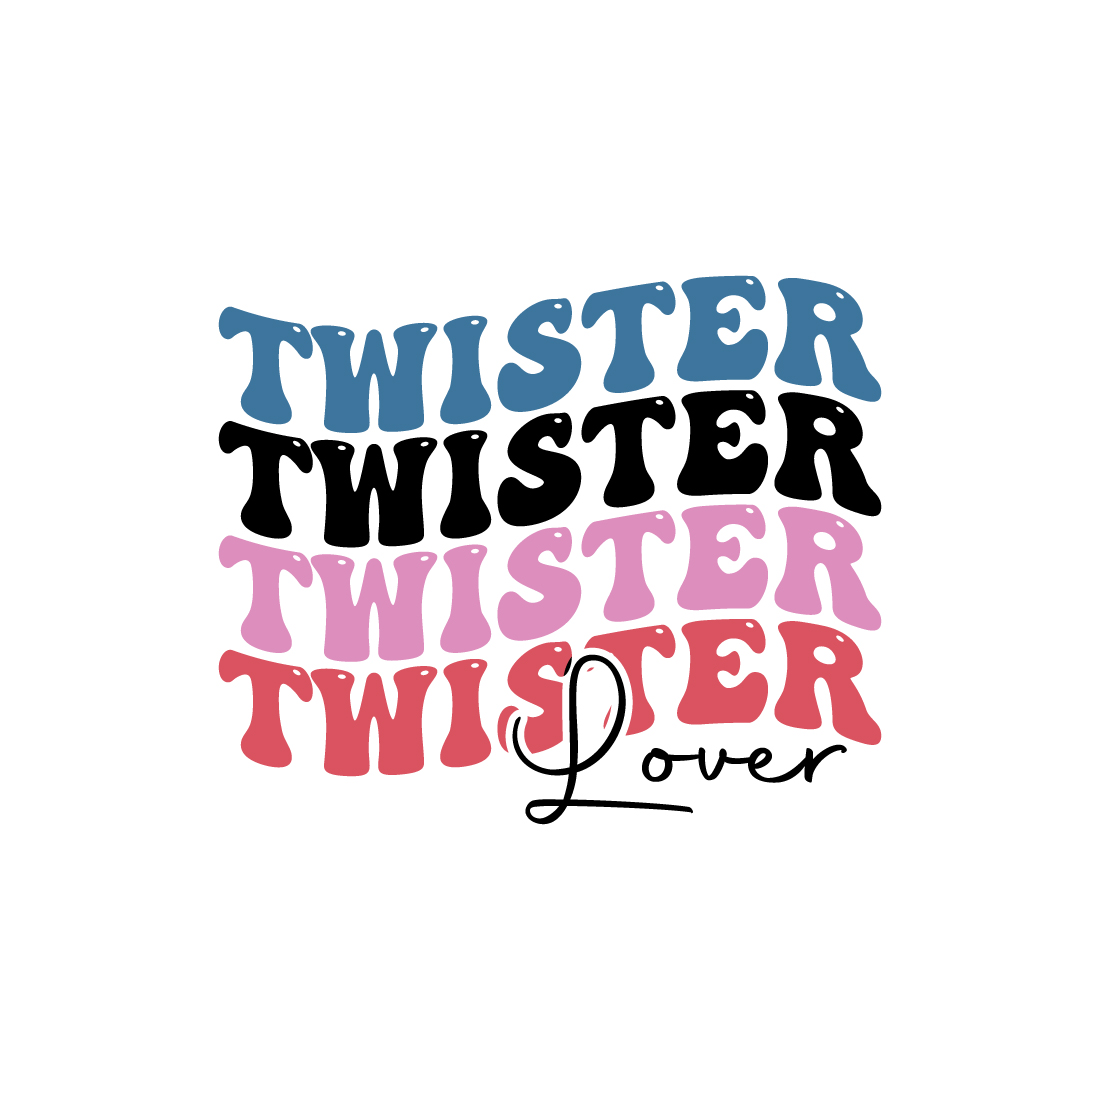 Twister lover indoor game retro typography design for t-shirts, cards ...